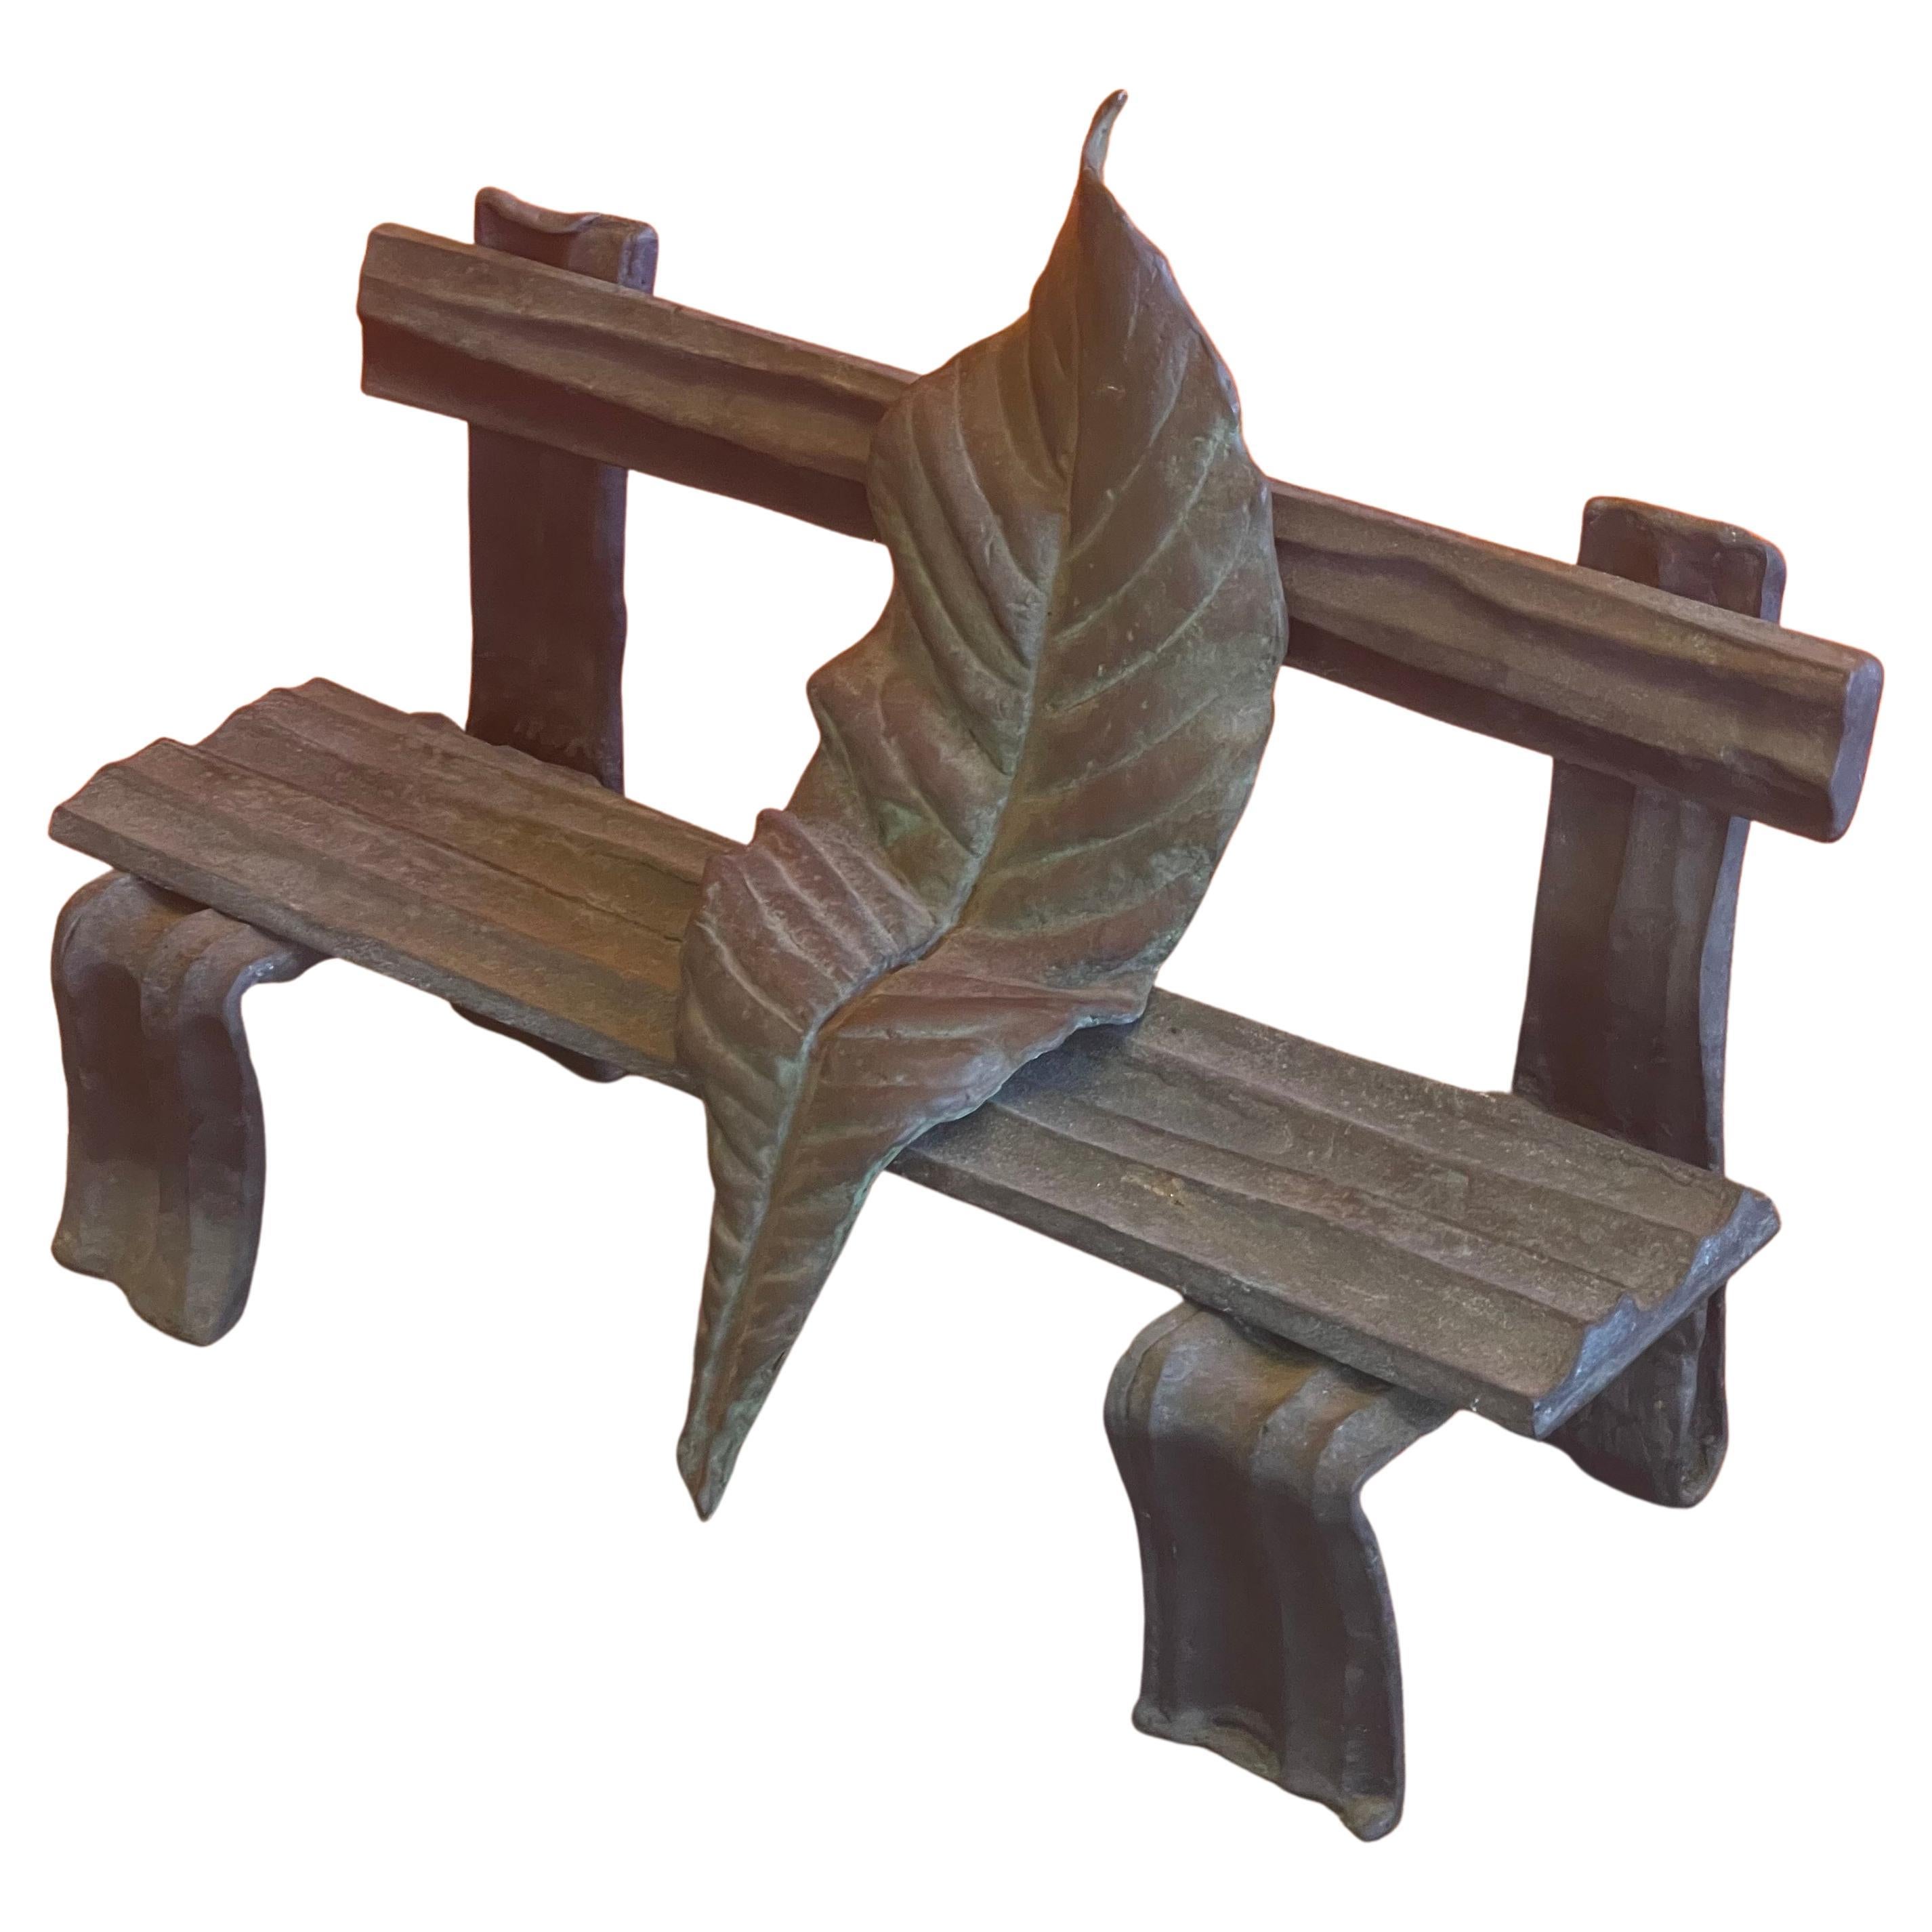 Large Patinated Bronze Sculpture "Park Bench" by Laurence Ambrose For Sale